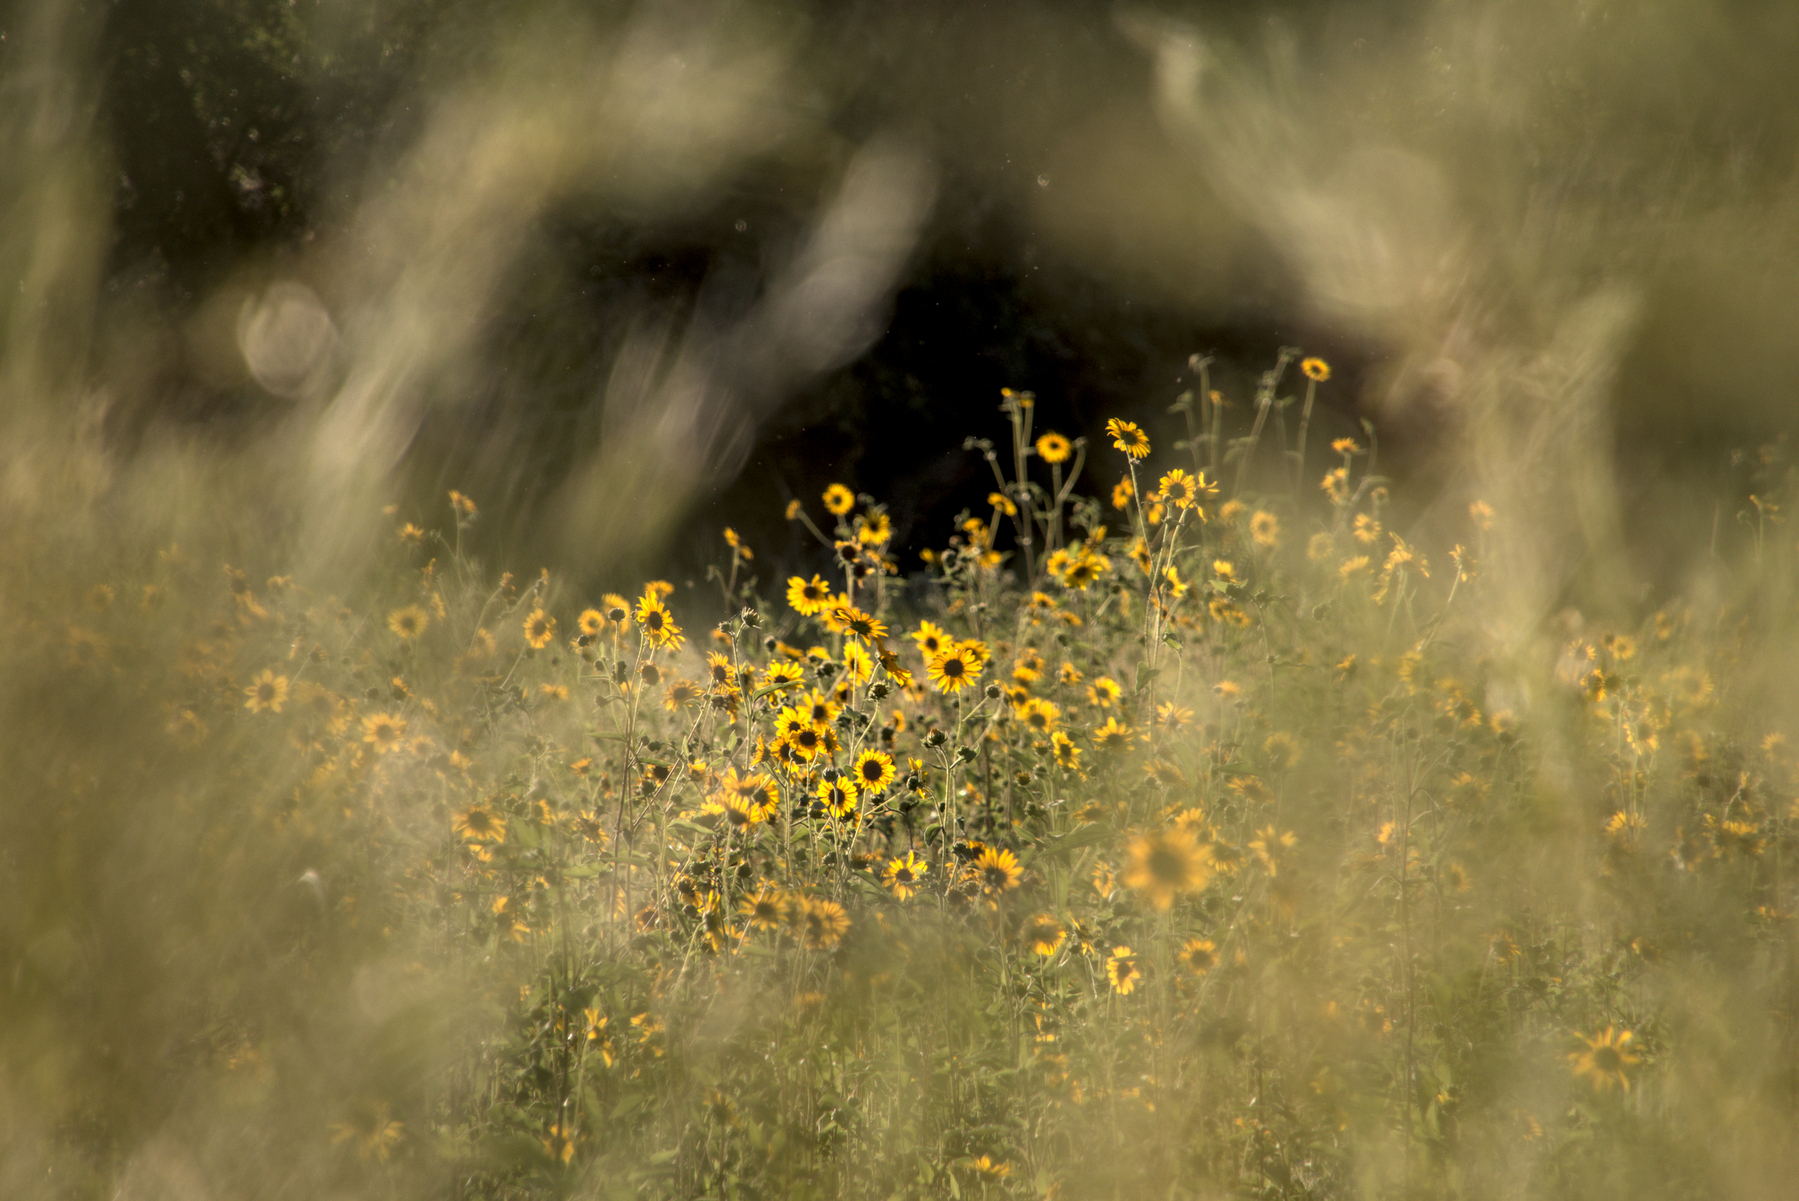 A group of wildflowers, Brown-eyed Susans or similar, is glimpsed through a hole in some foliage.